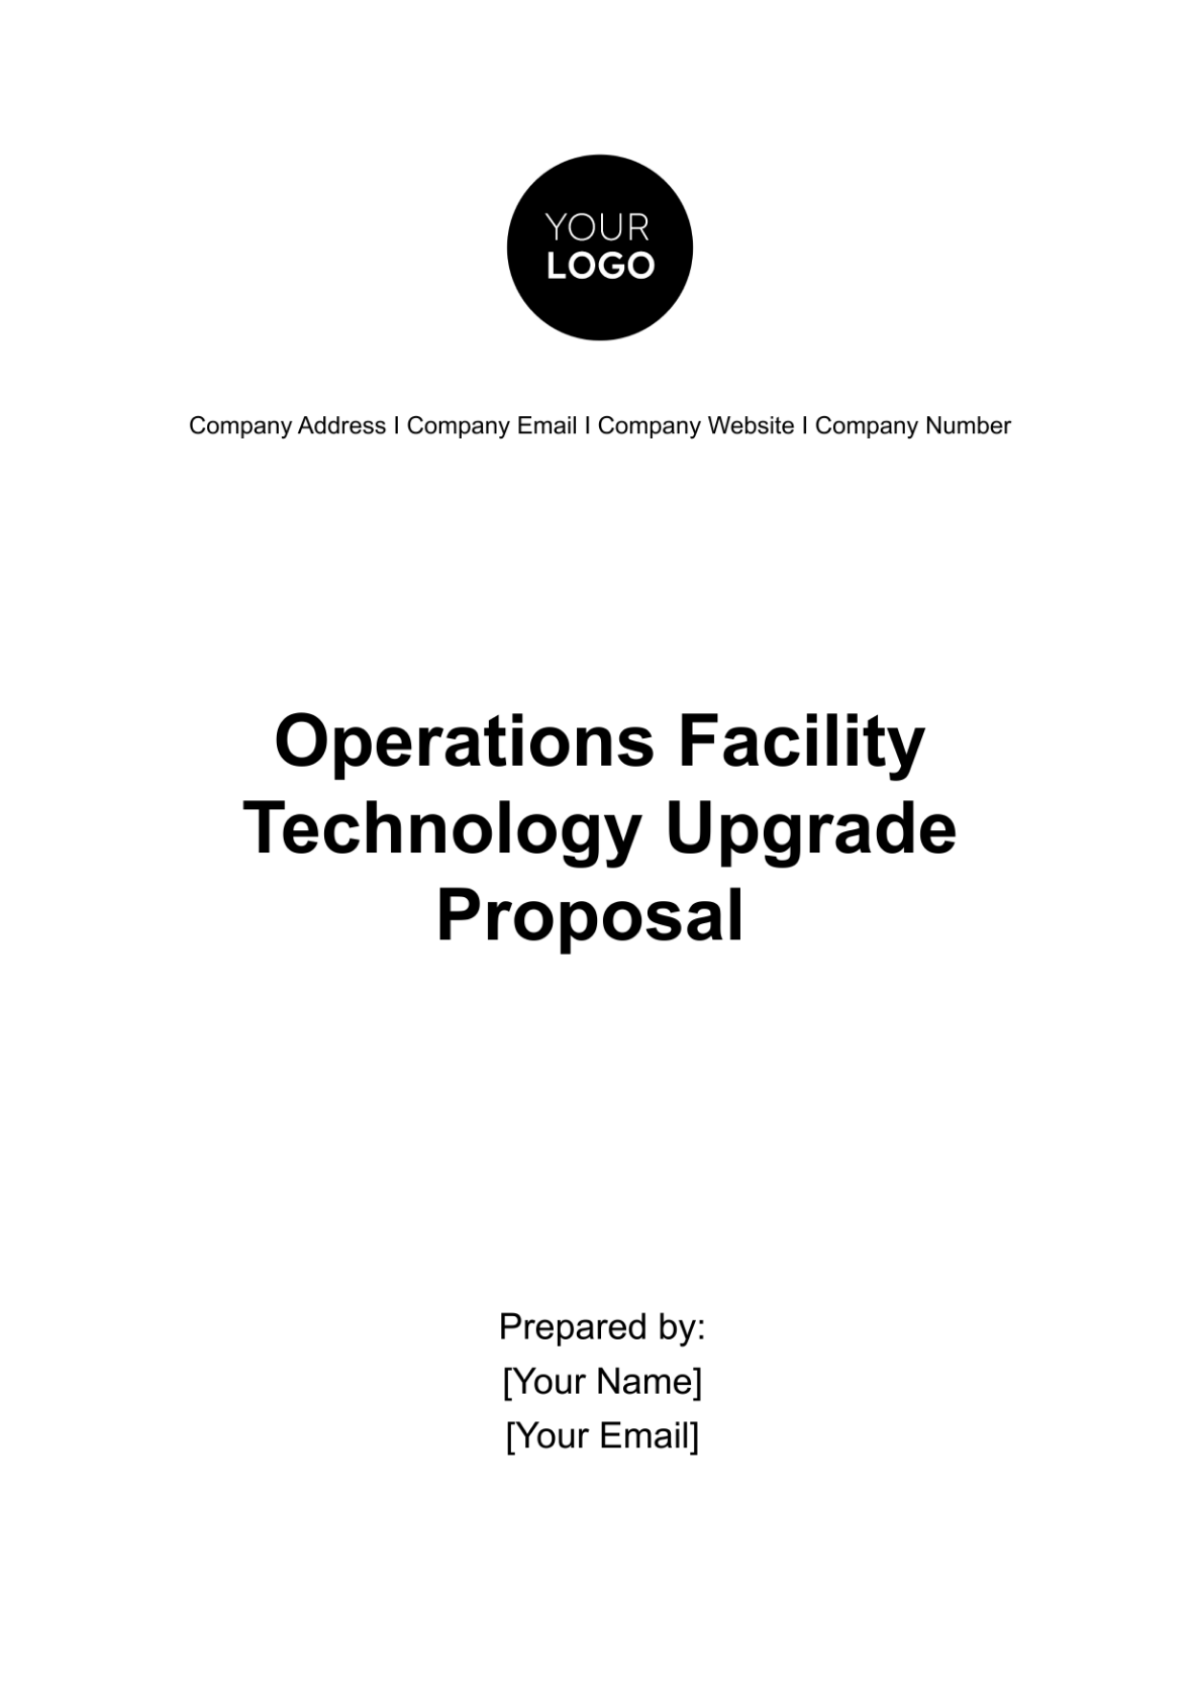 Operations Facility Technology Upgrade Proposal Template